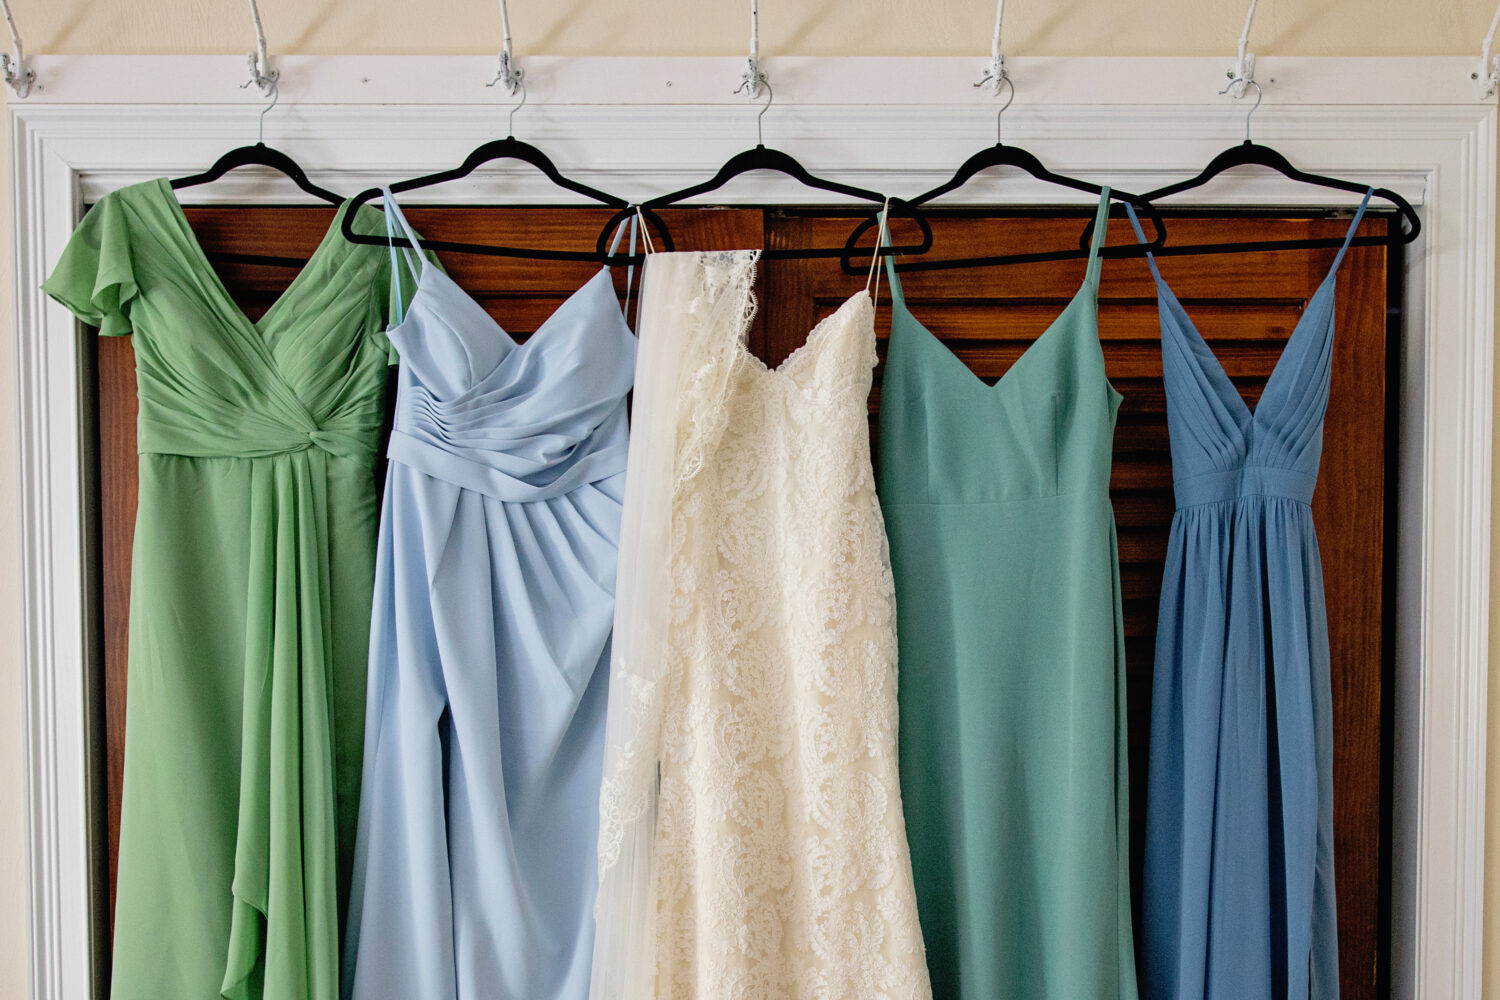 the dresses in a row on black hangers